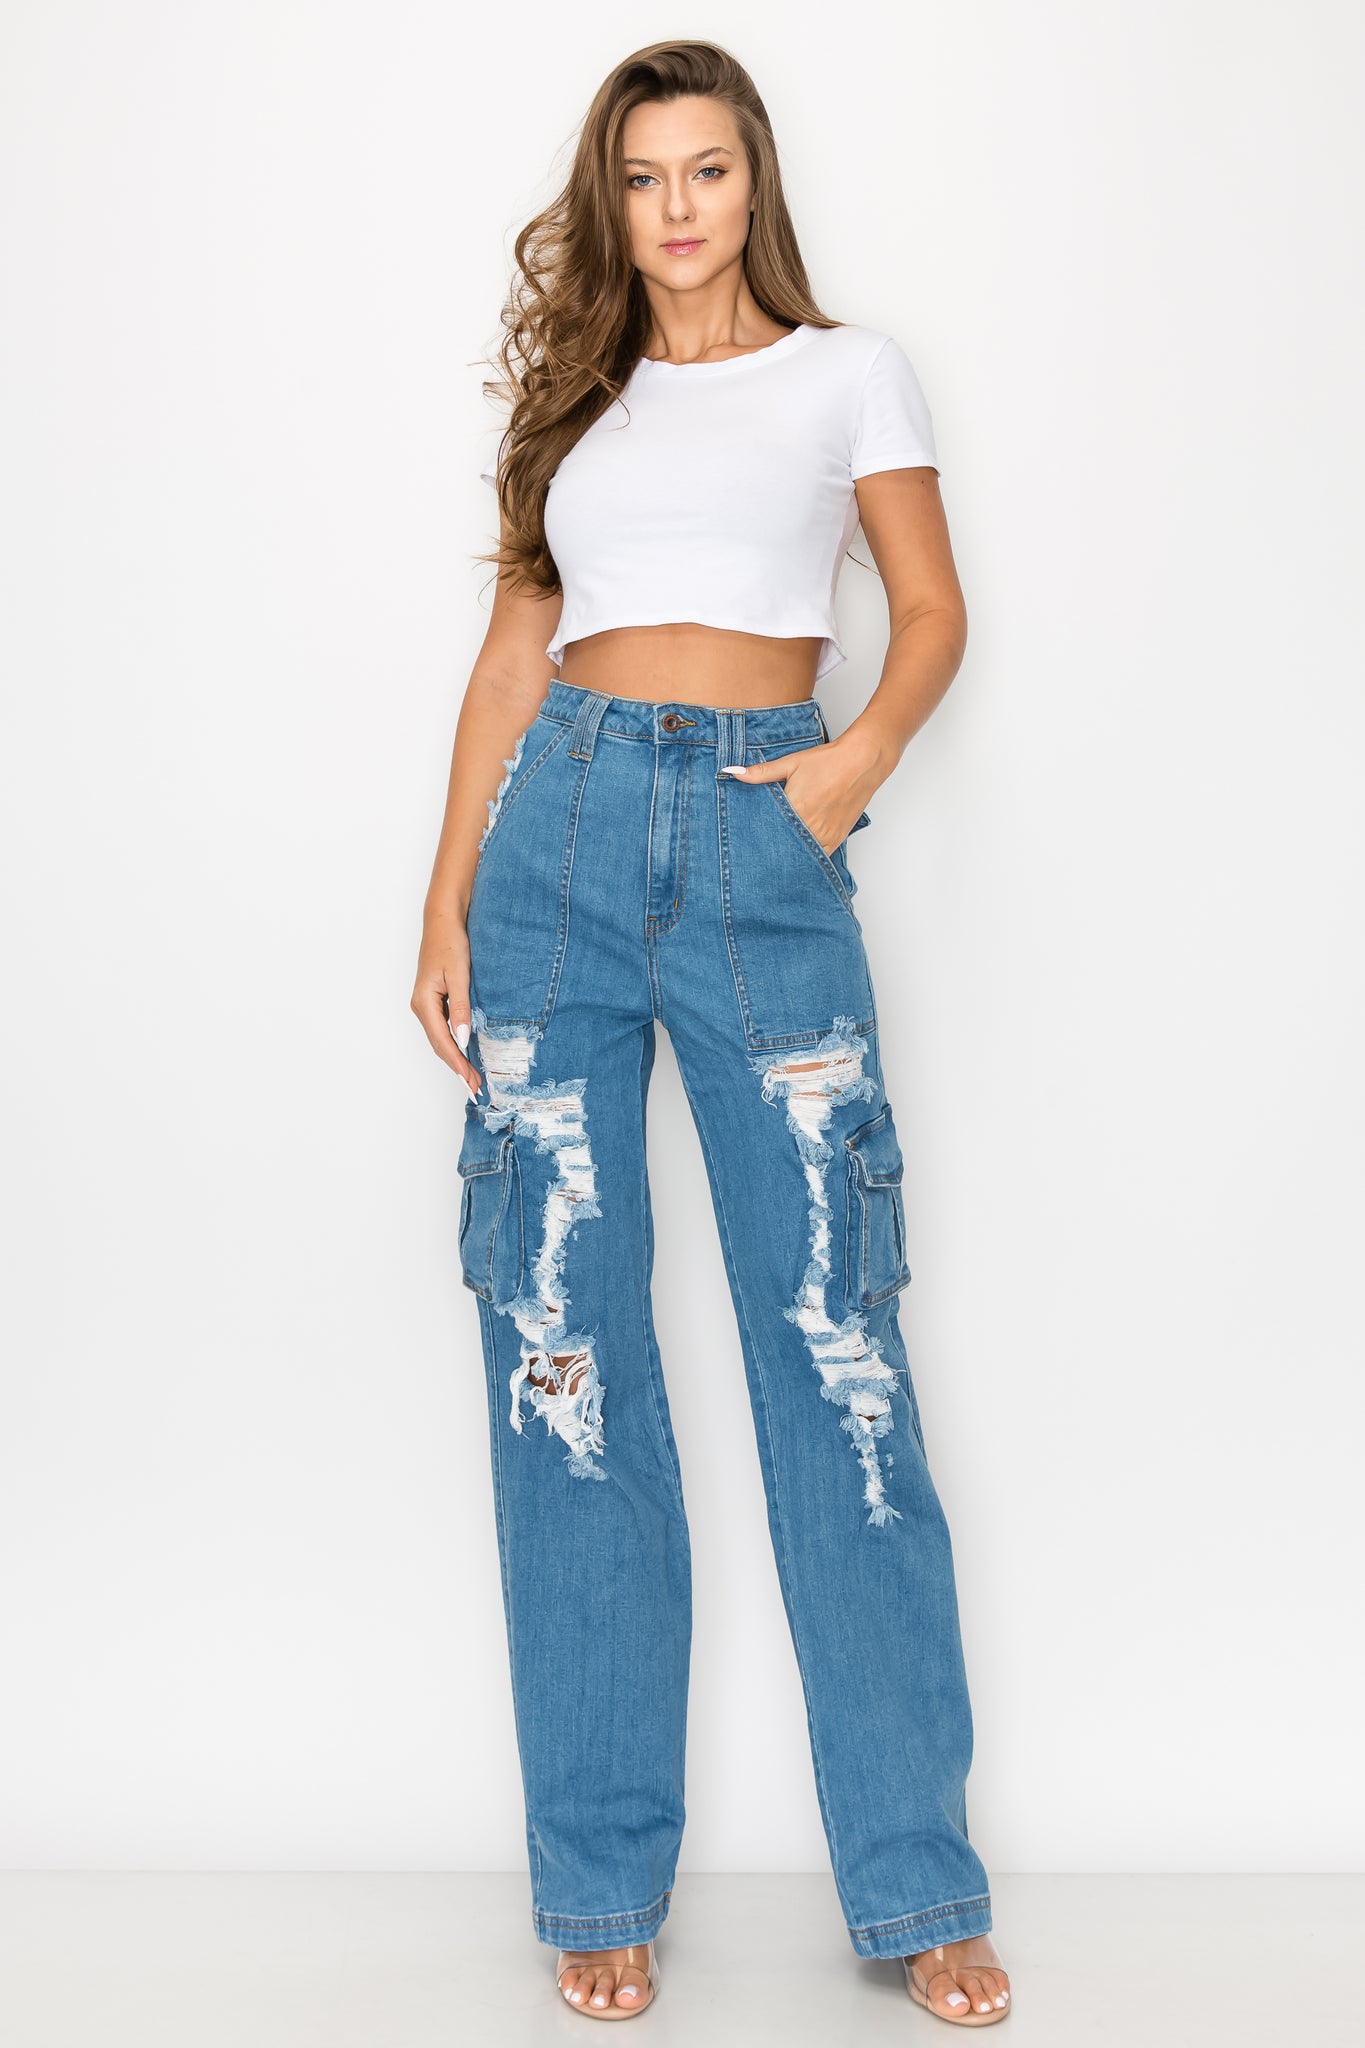 4890 Women's Cargo Pants High Waisted Ripped Straight Jeans